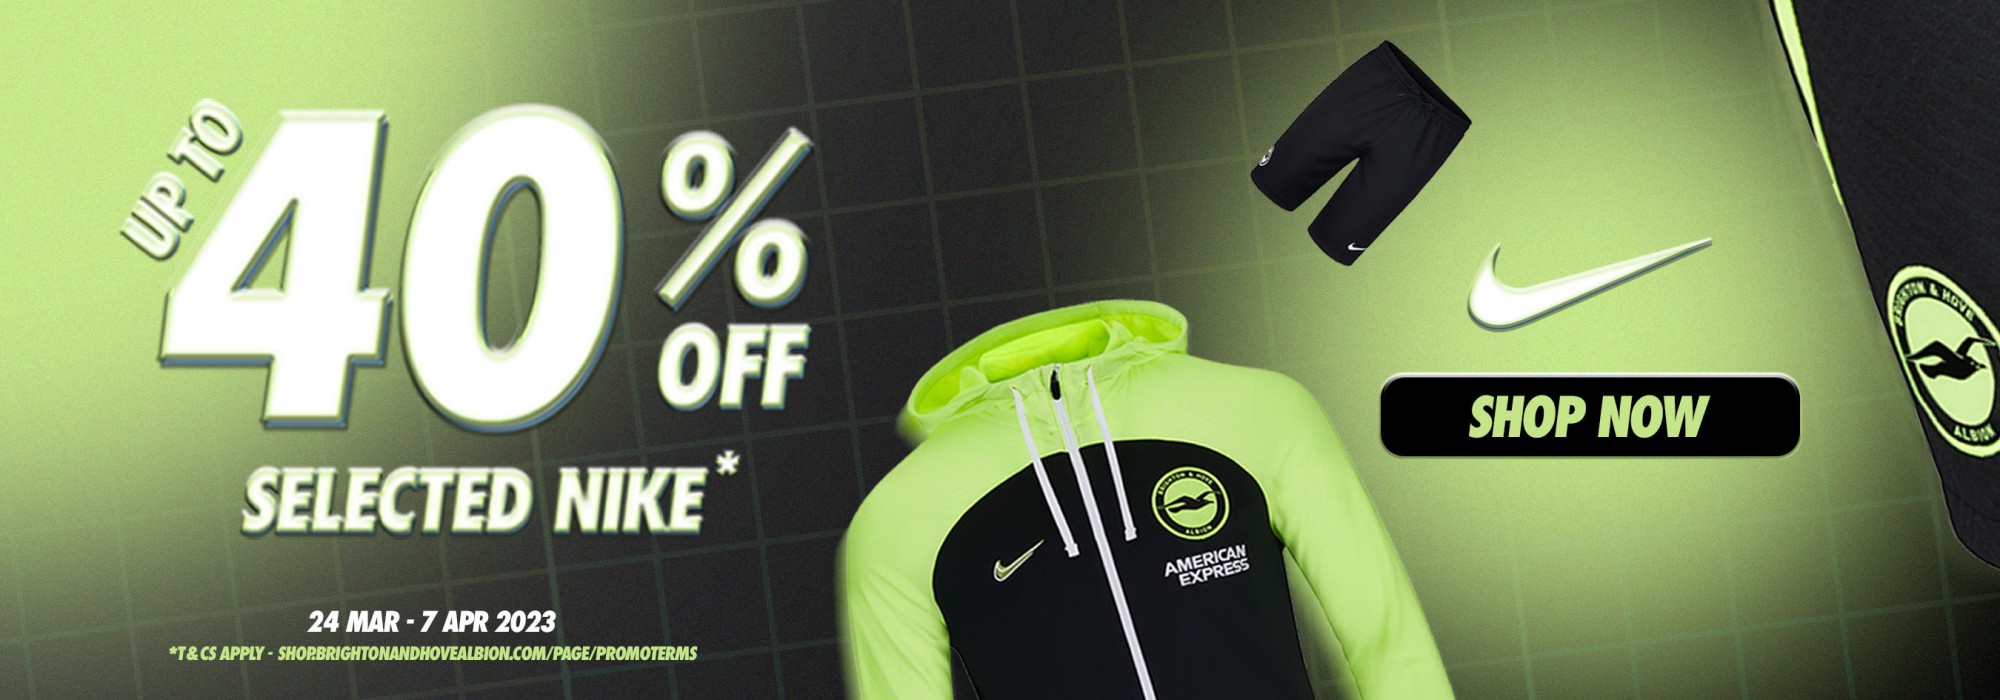 Up to 40% off selected Nike Products